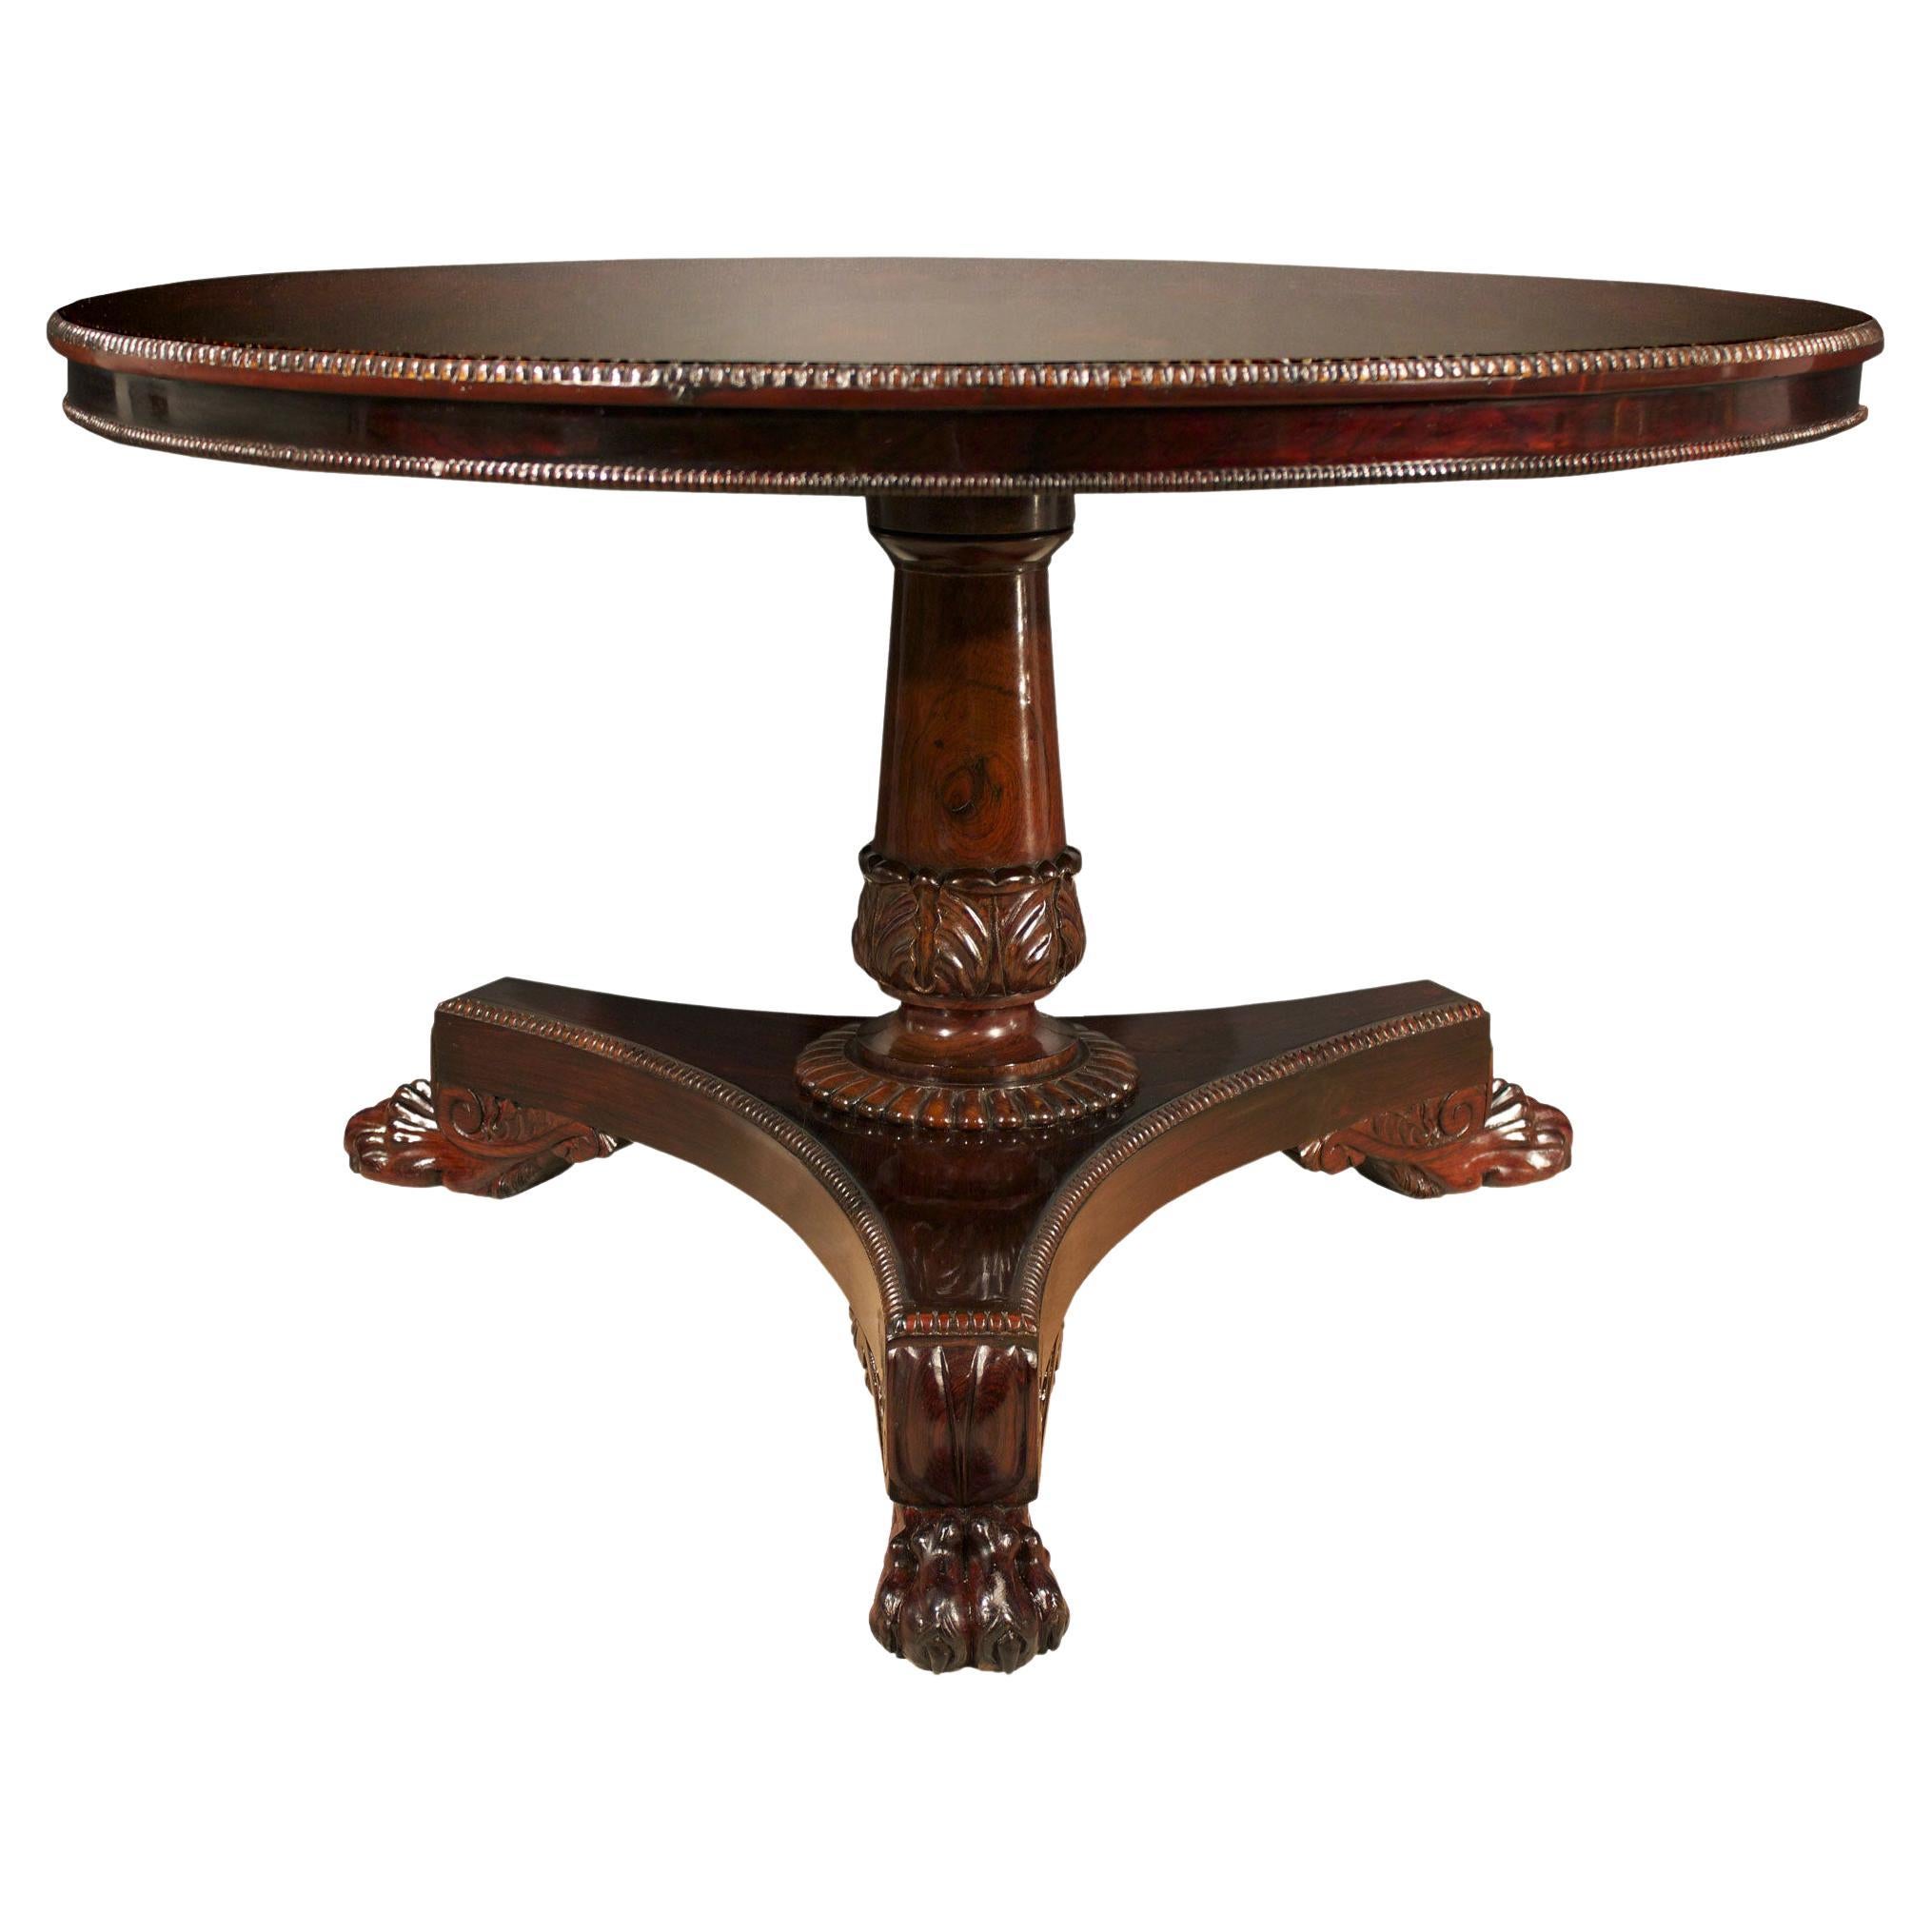 English 19th Centurty Regency Style Rosewood Tilt-Top Center Table